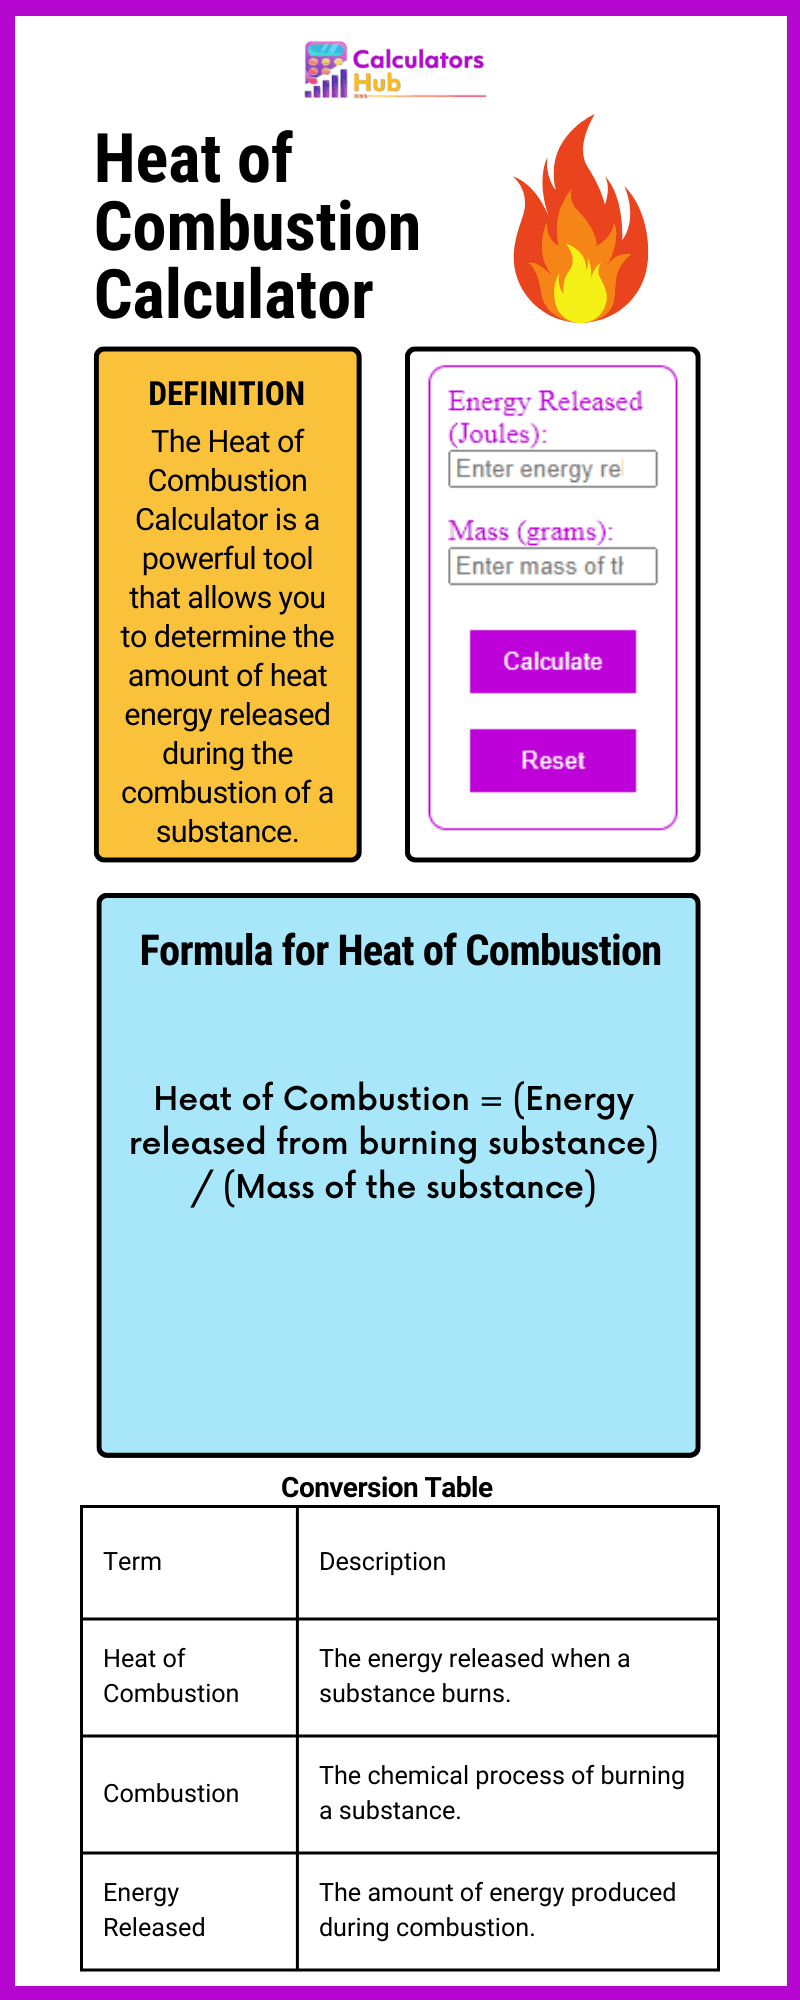 Heat of Combustion Calculator